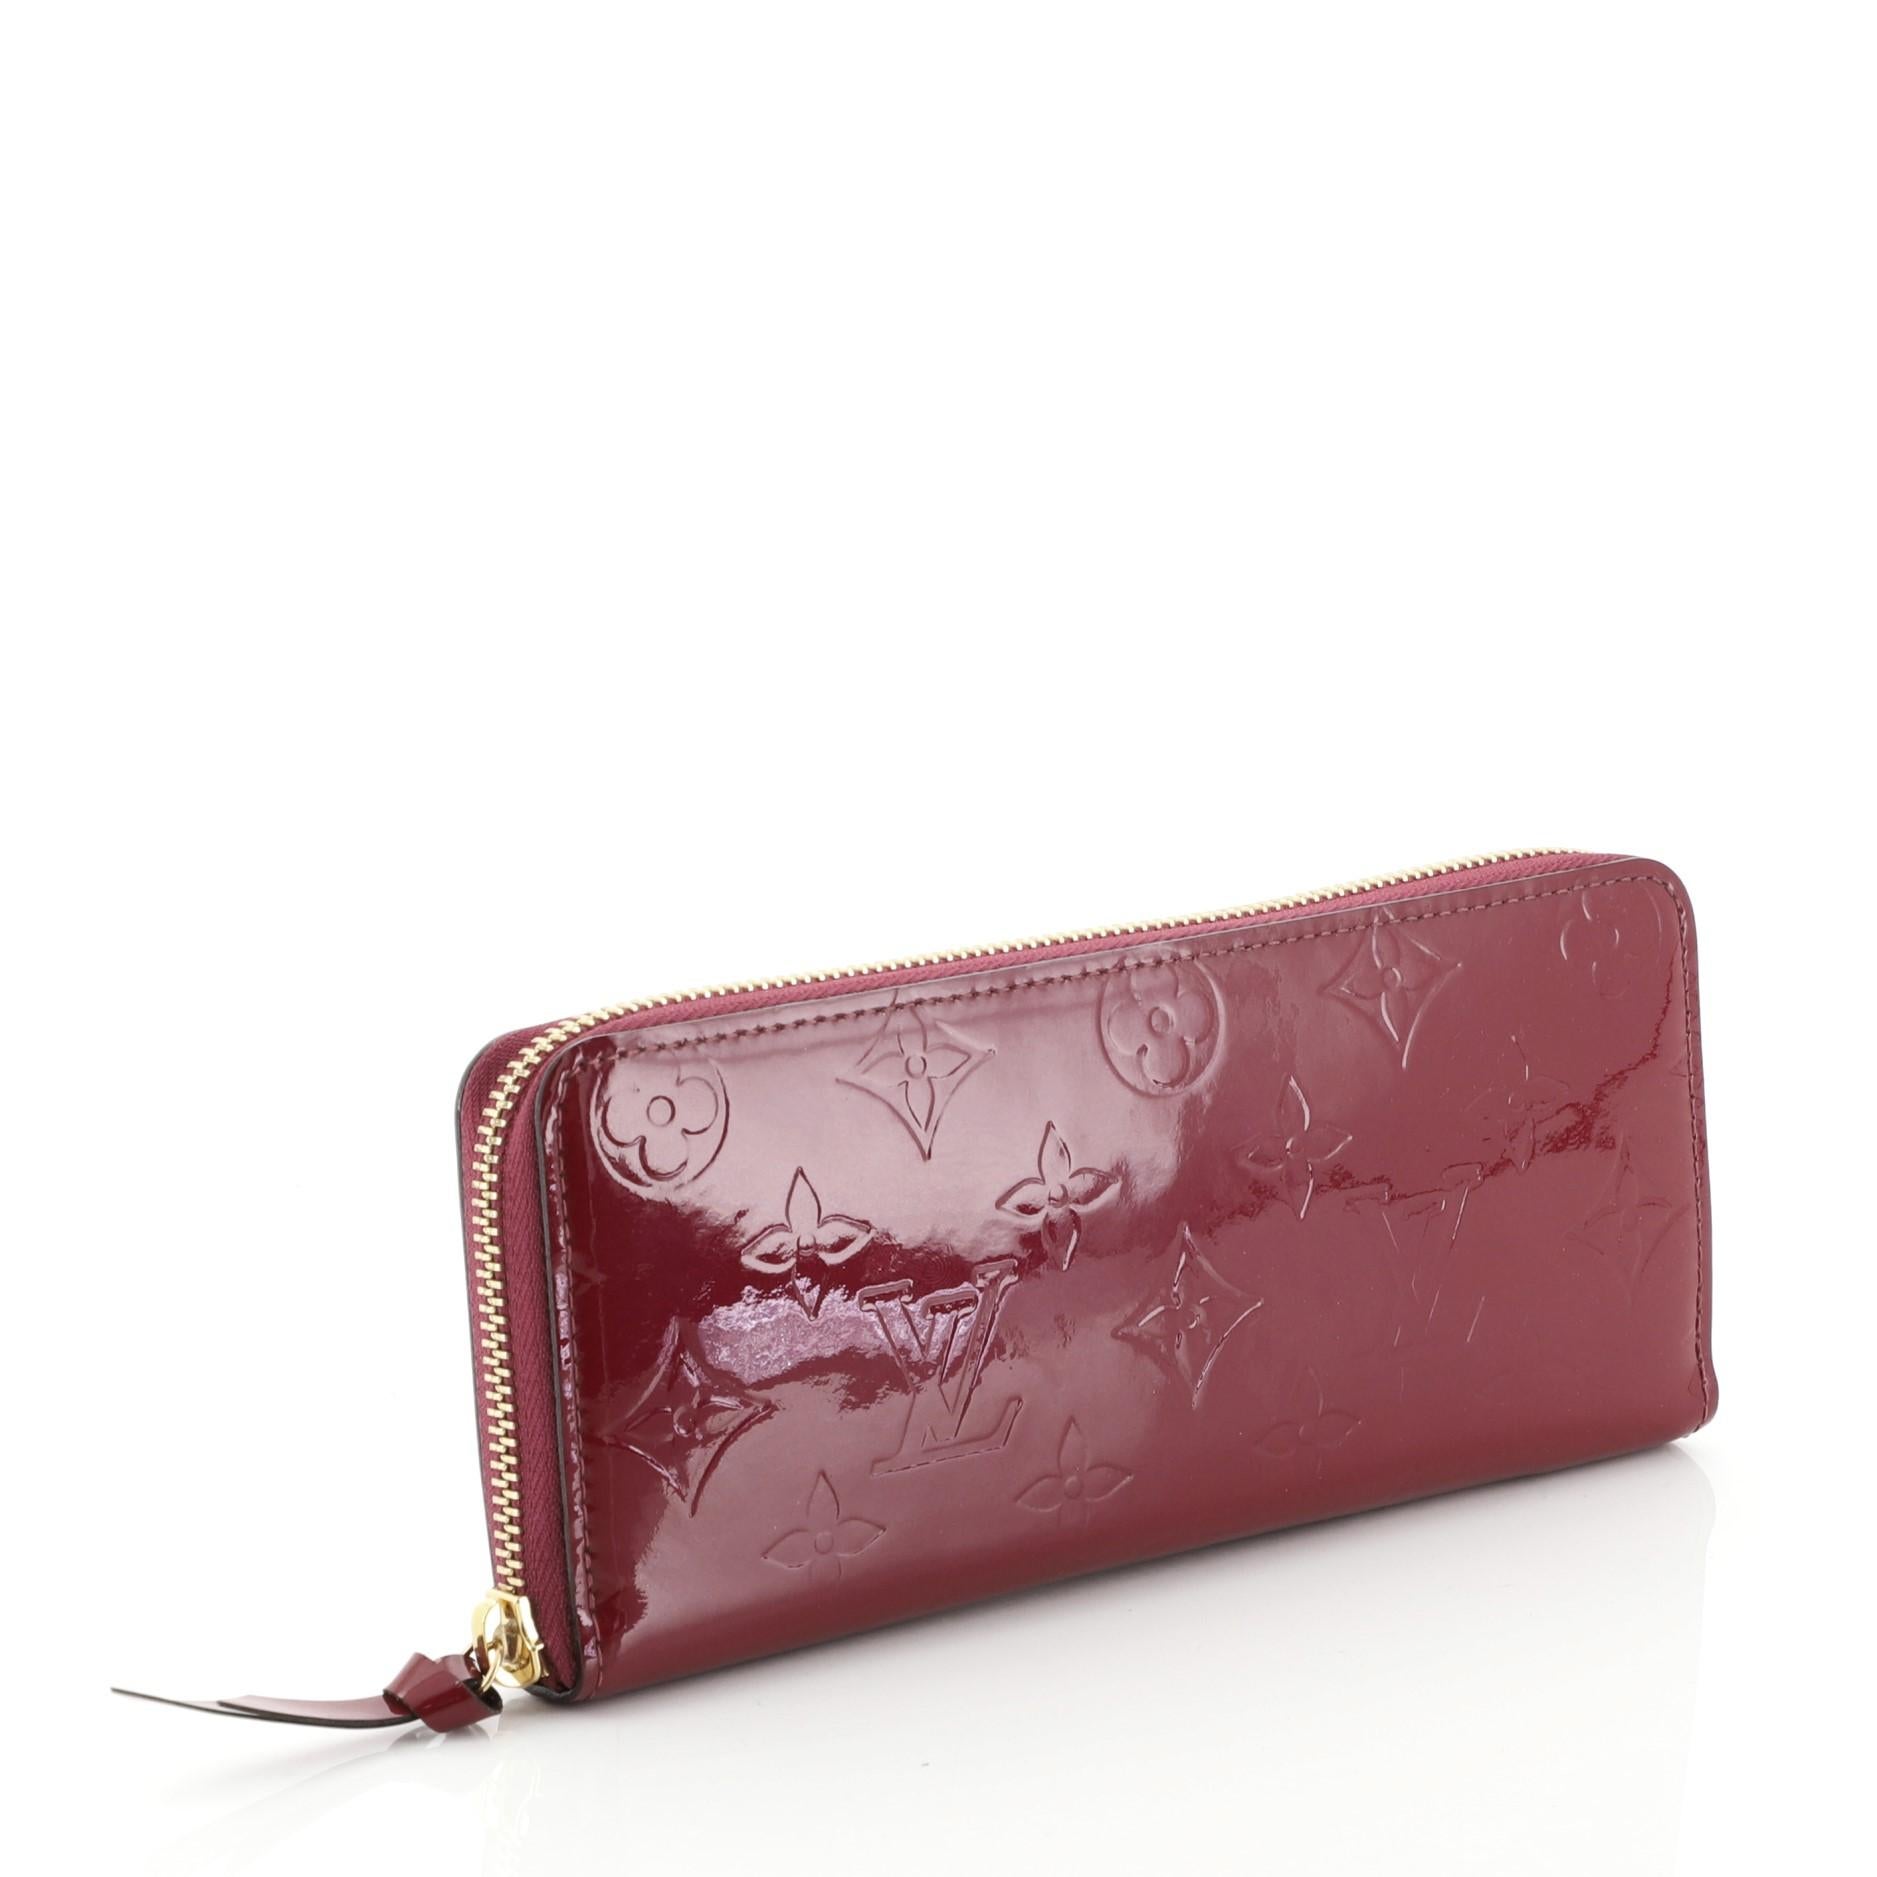 This Louis Vuitton Clemence Wallet Monogram Vernis, crafted from purple monogram vernis, features gold-tone hardware. Its all-around zip closure opens to a purple leather interior with multiple card slots, slip pockets, gusseted compartments, and